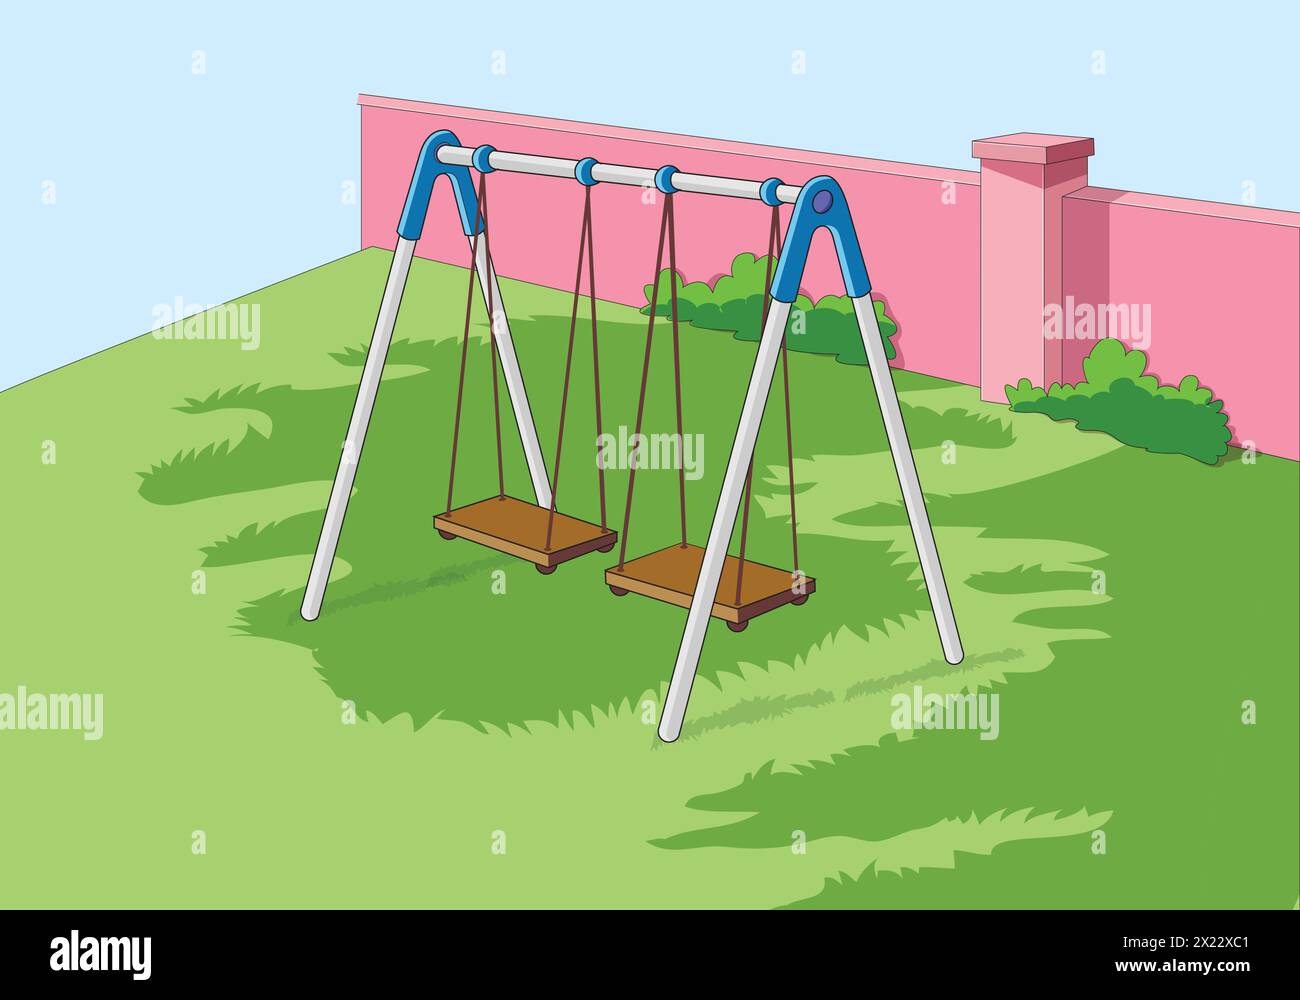 Swing in a playground vector illustration Stock Vector